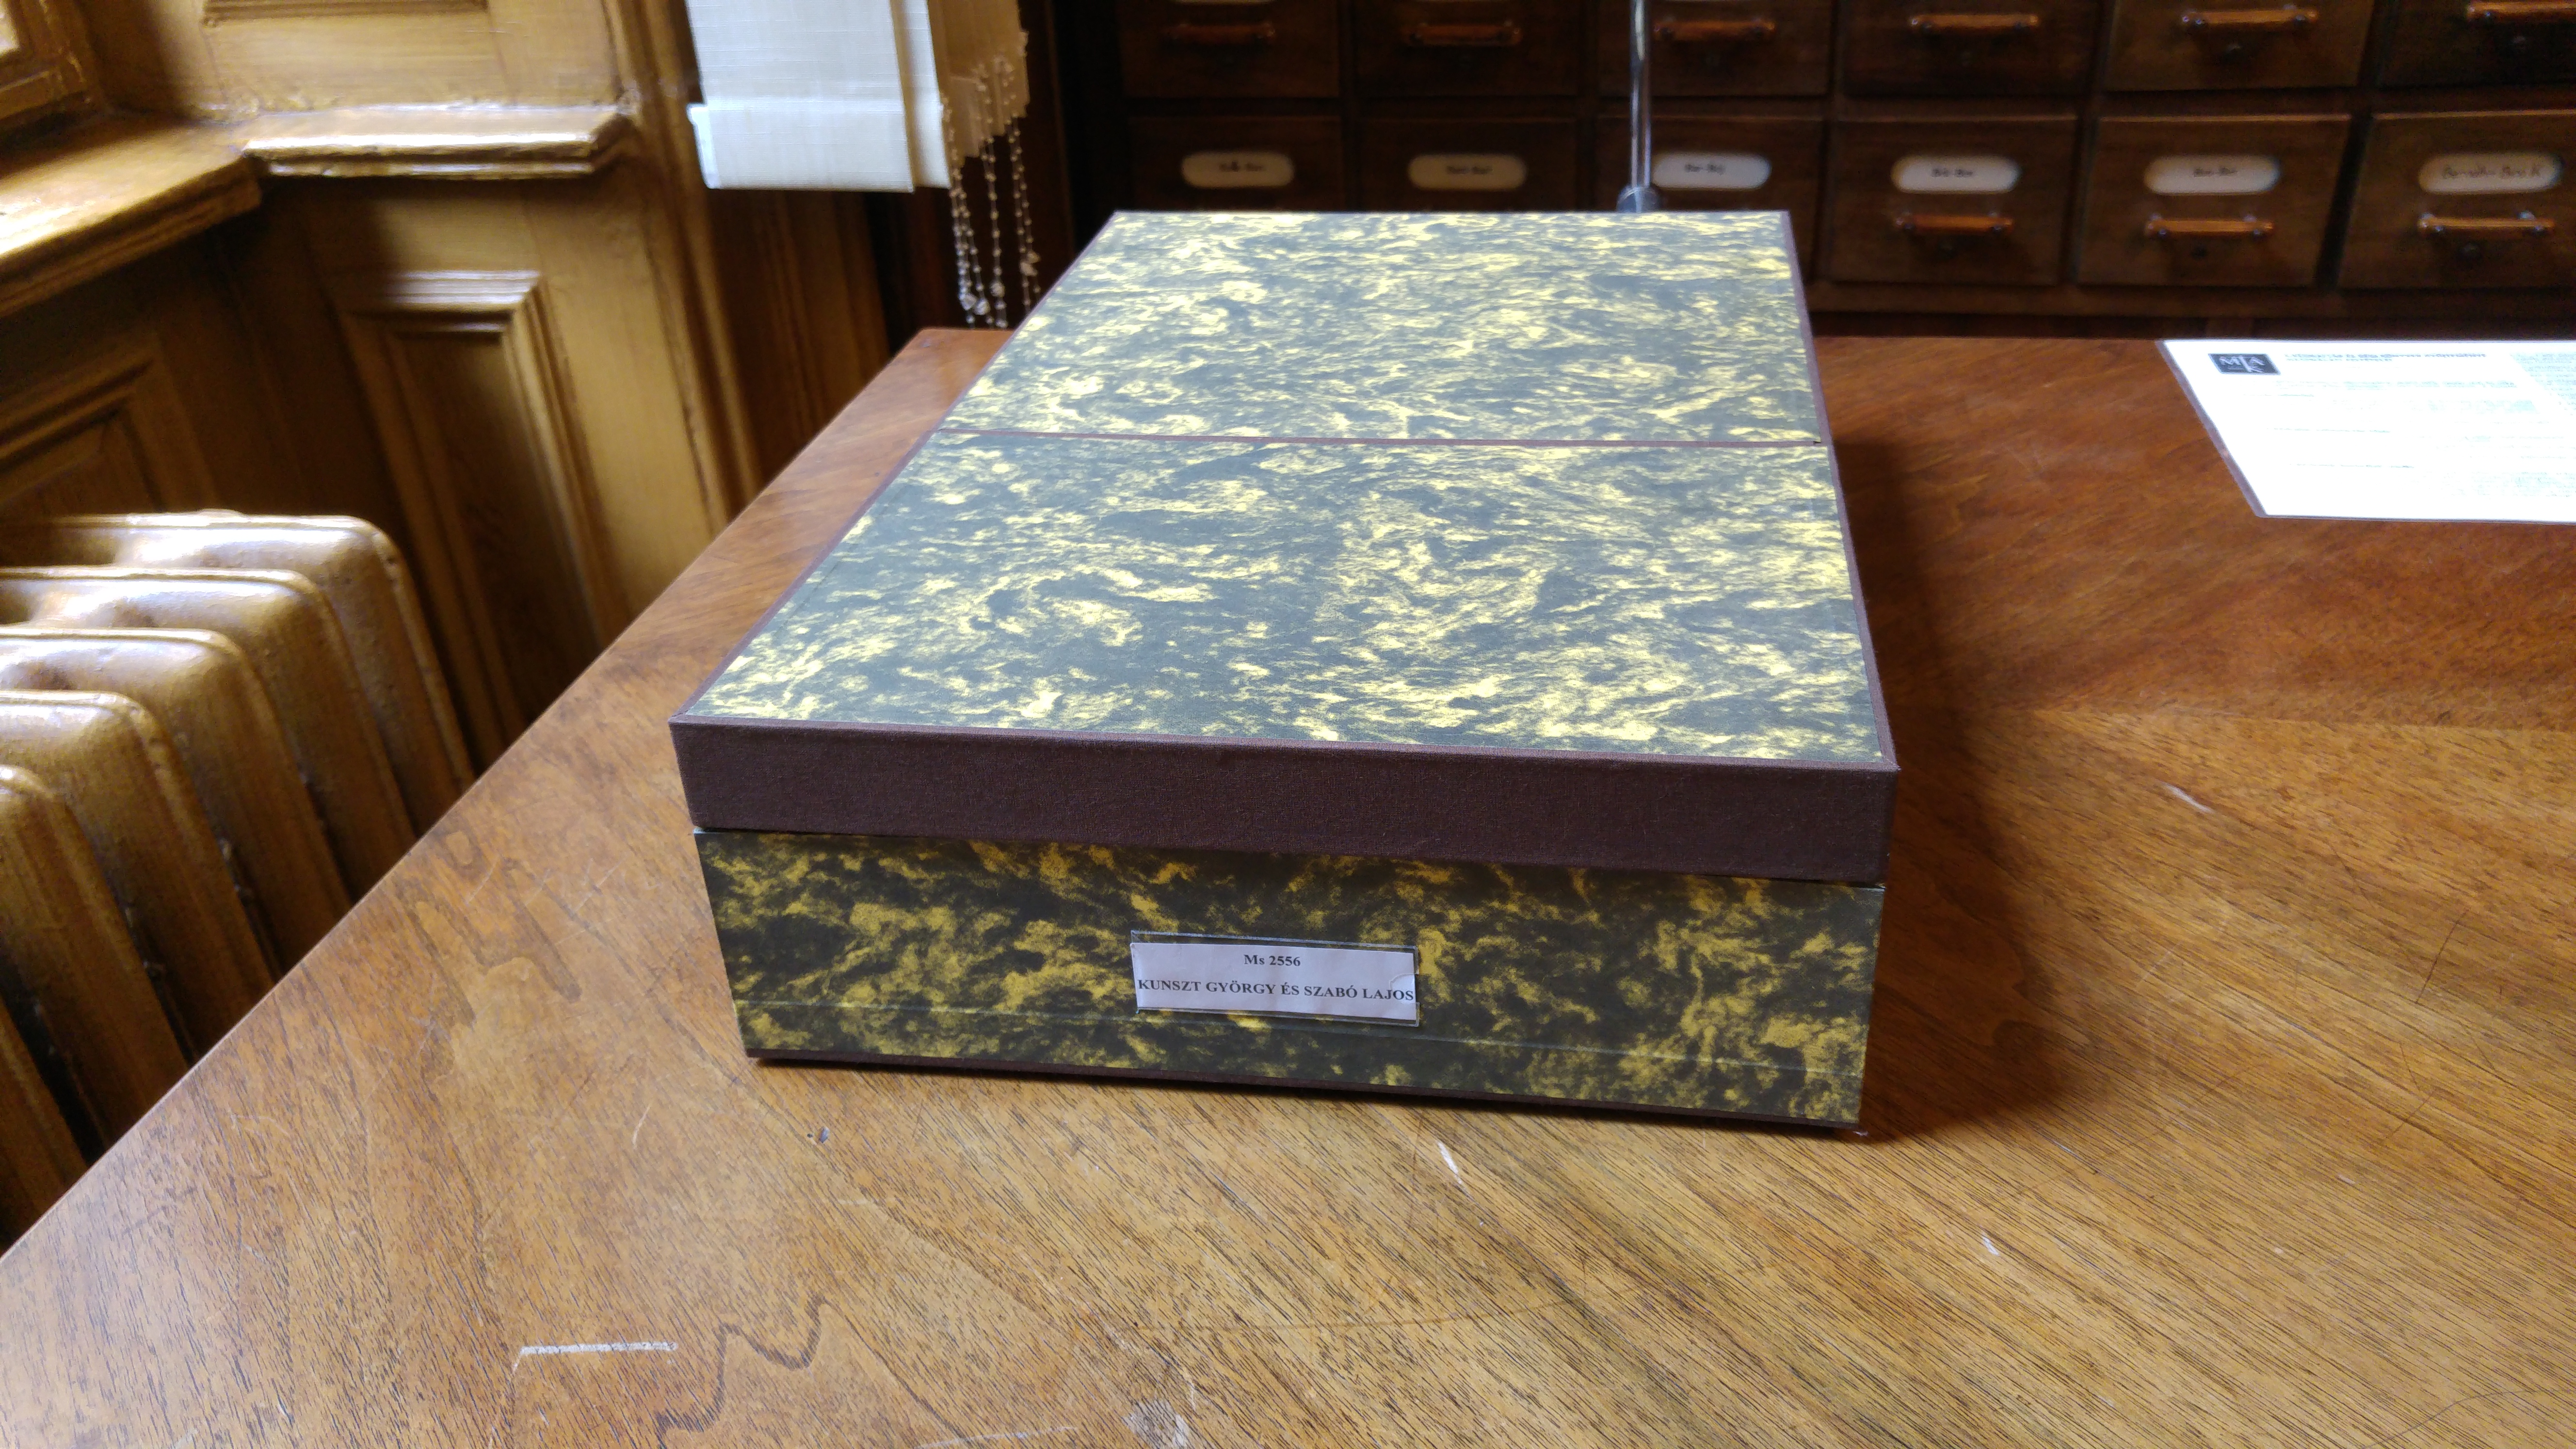 One of the boxes containing the notebooks of Lajos Szabó.